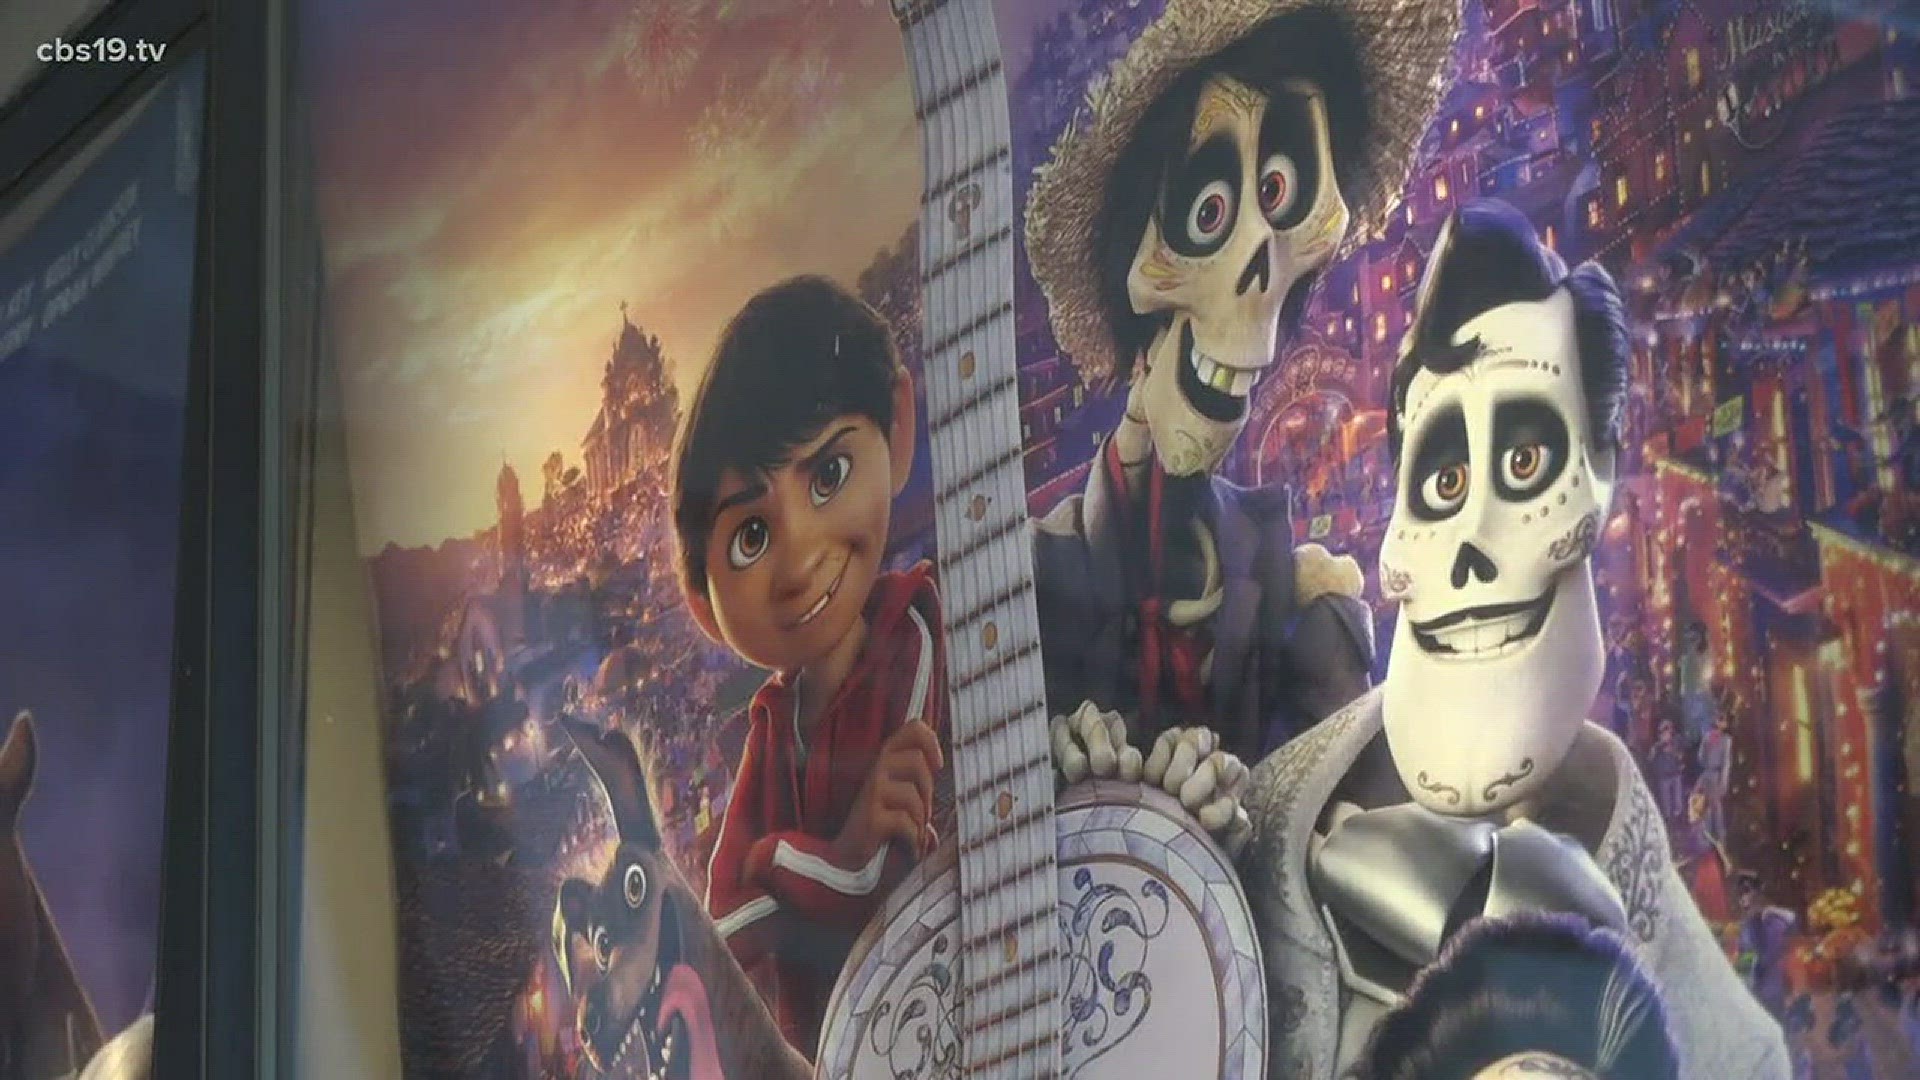 Disney's 'coco' sparks conversation about representation in movies |  